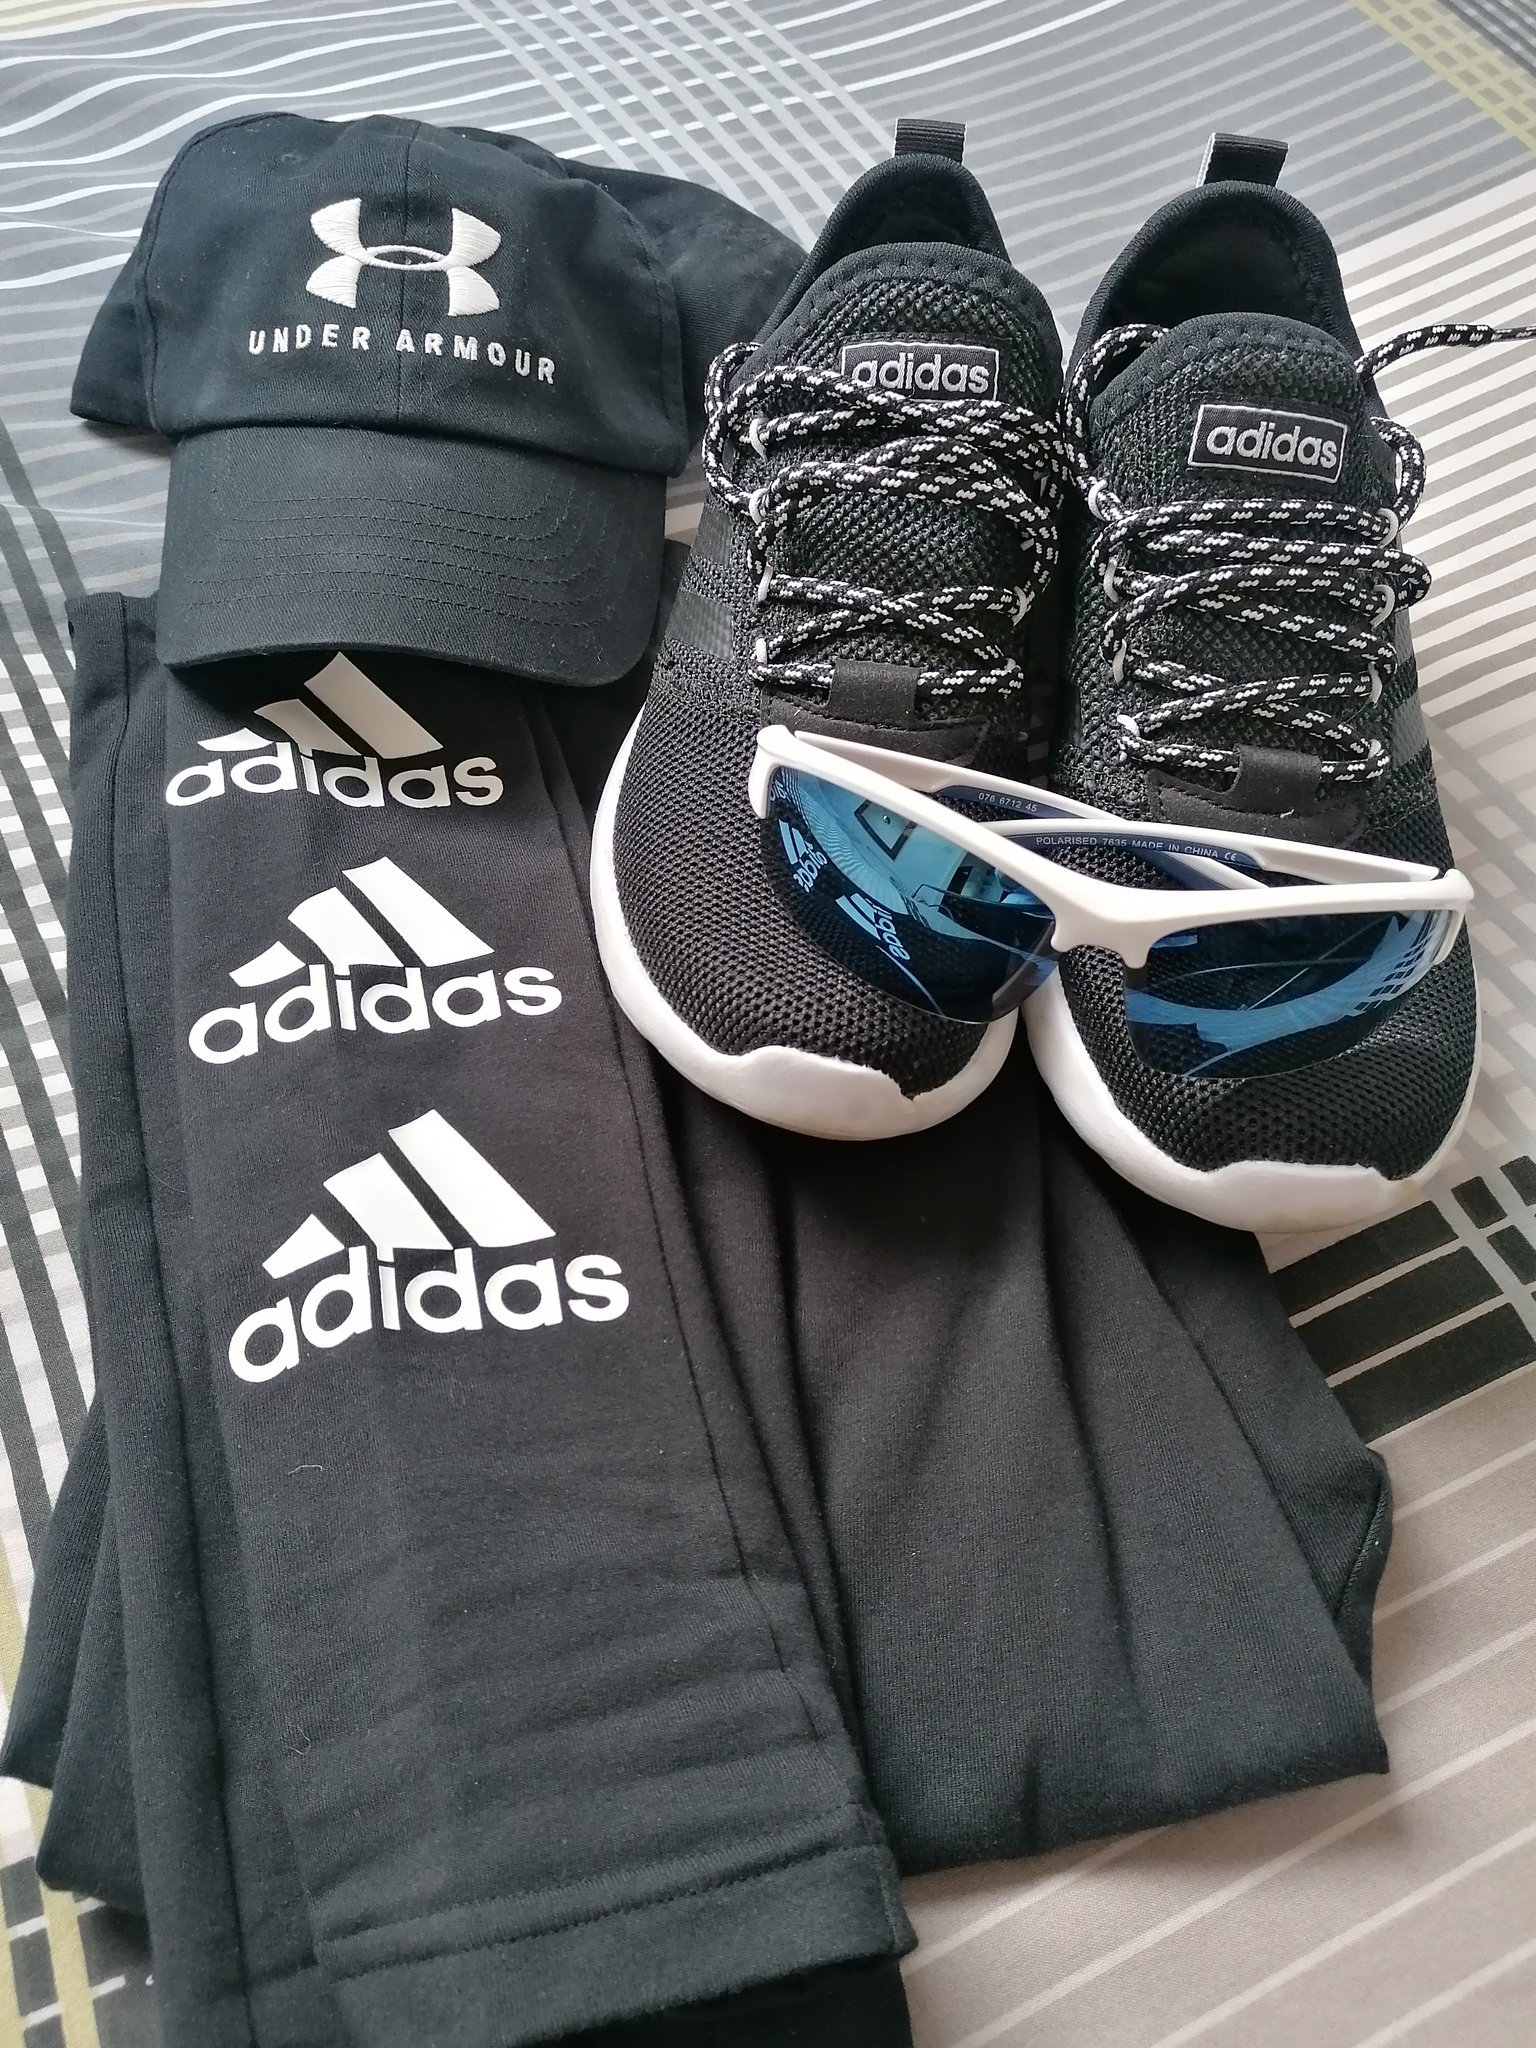 Adidas trousers, under armour hat, adidas running shoes